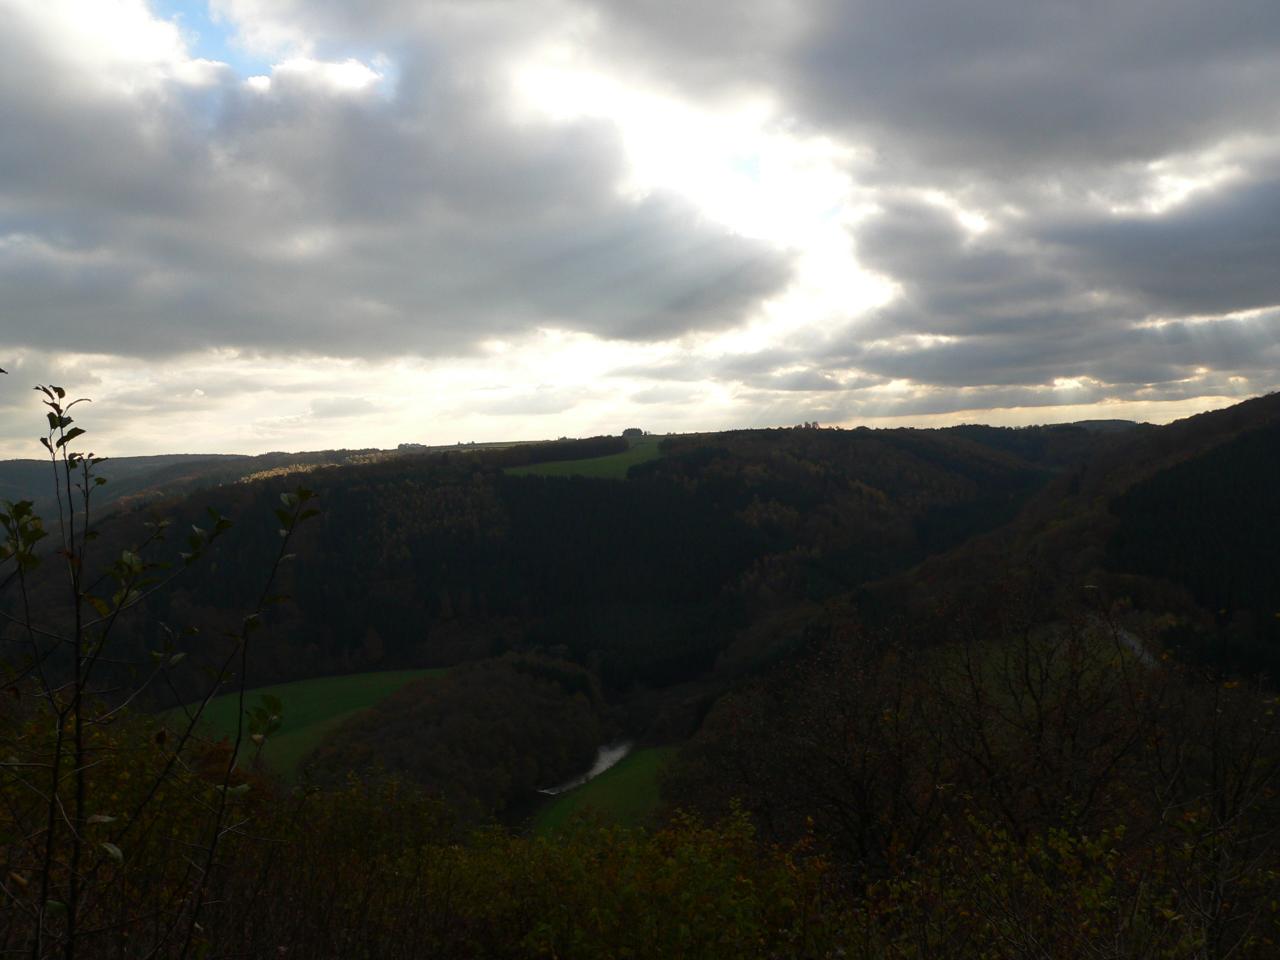 PAYSAGE LUXEMBOURGEOIS 1